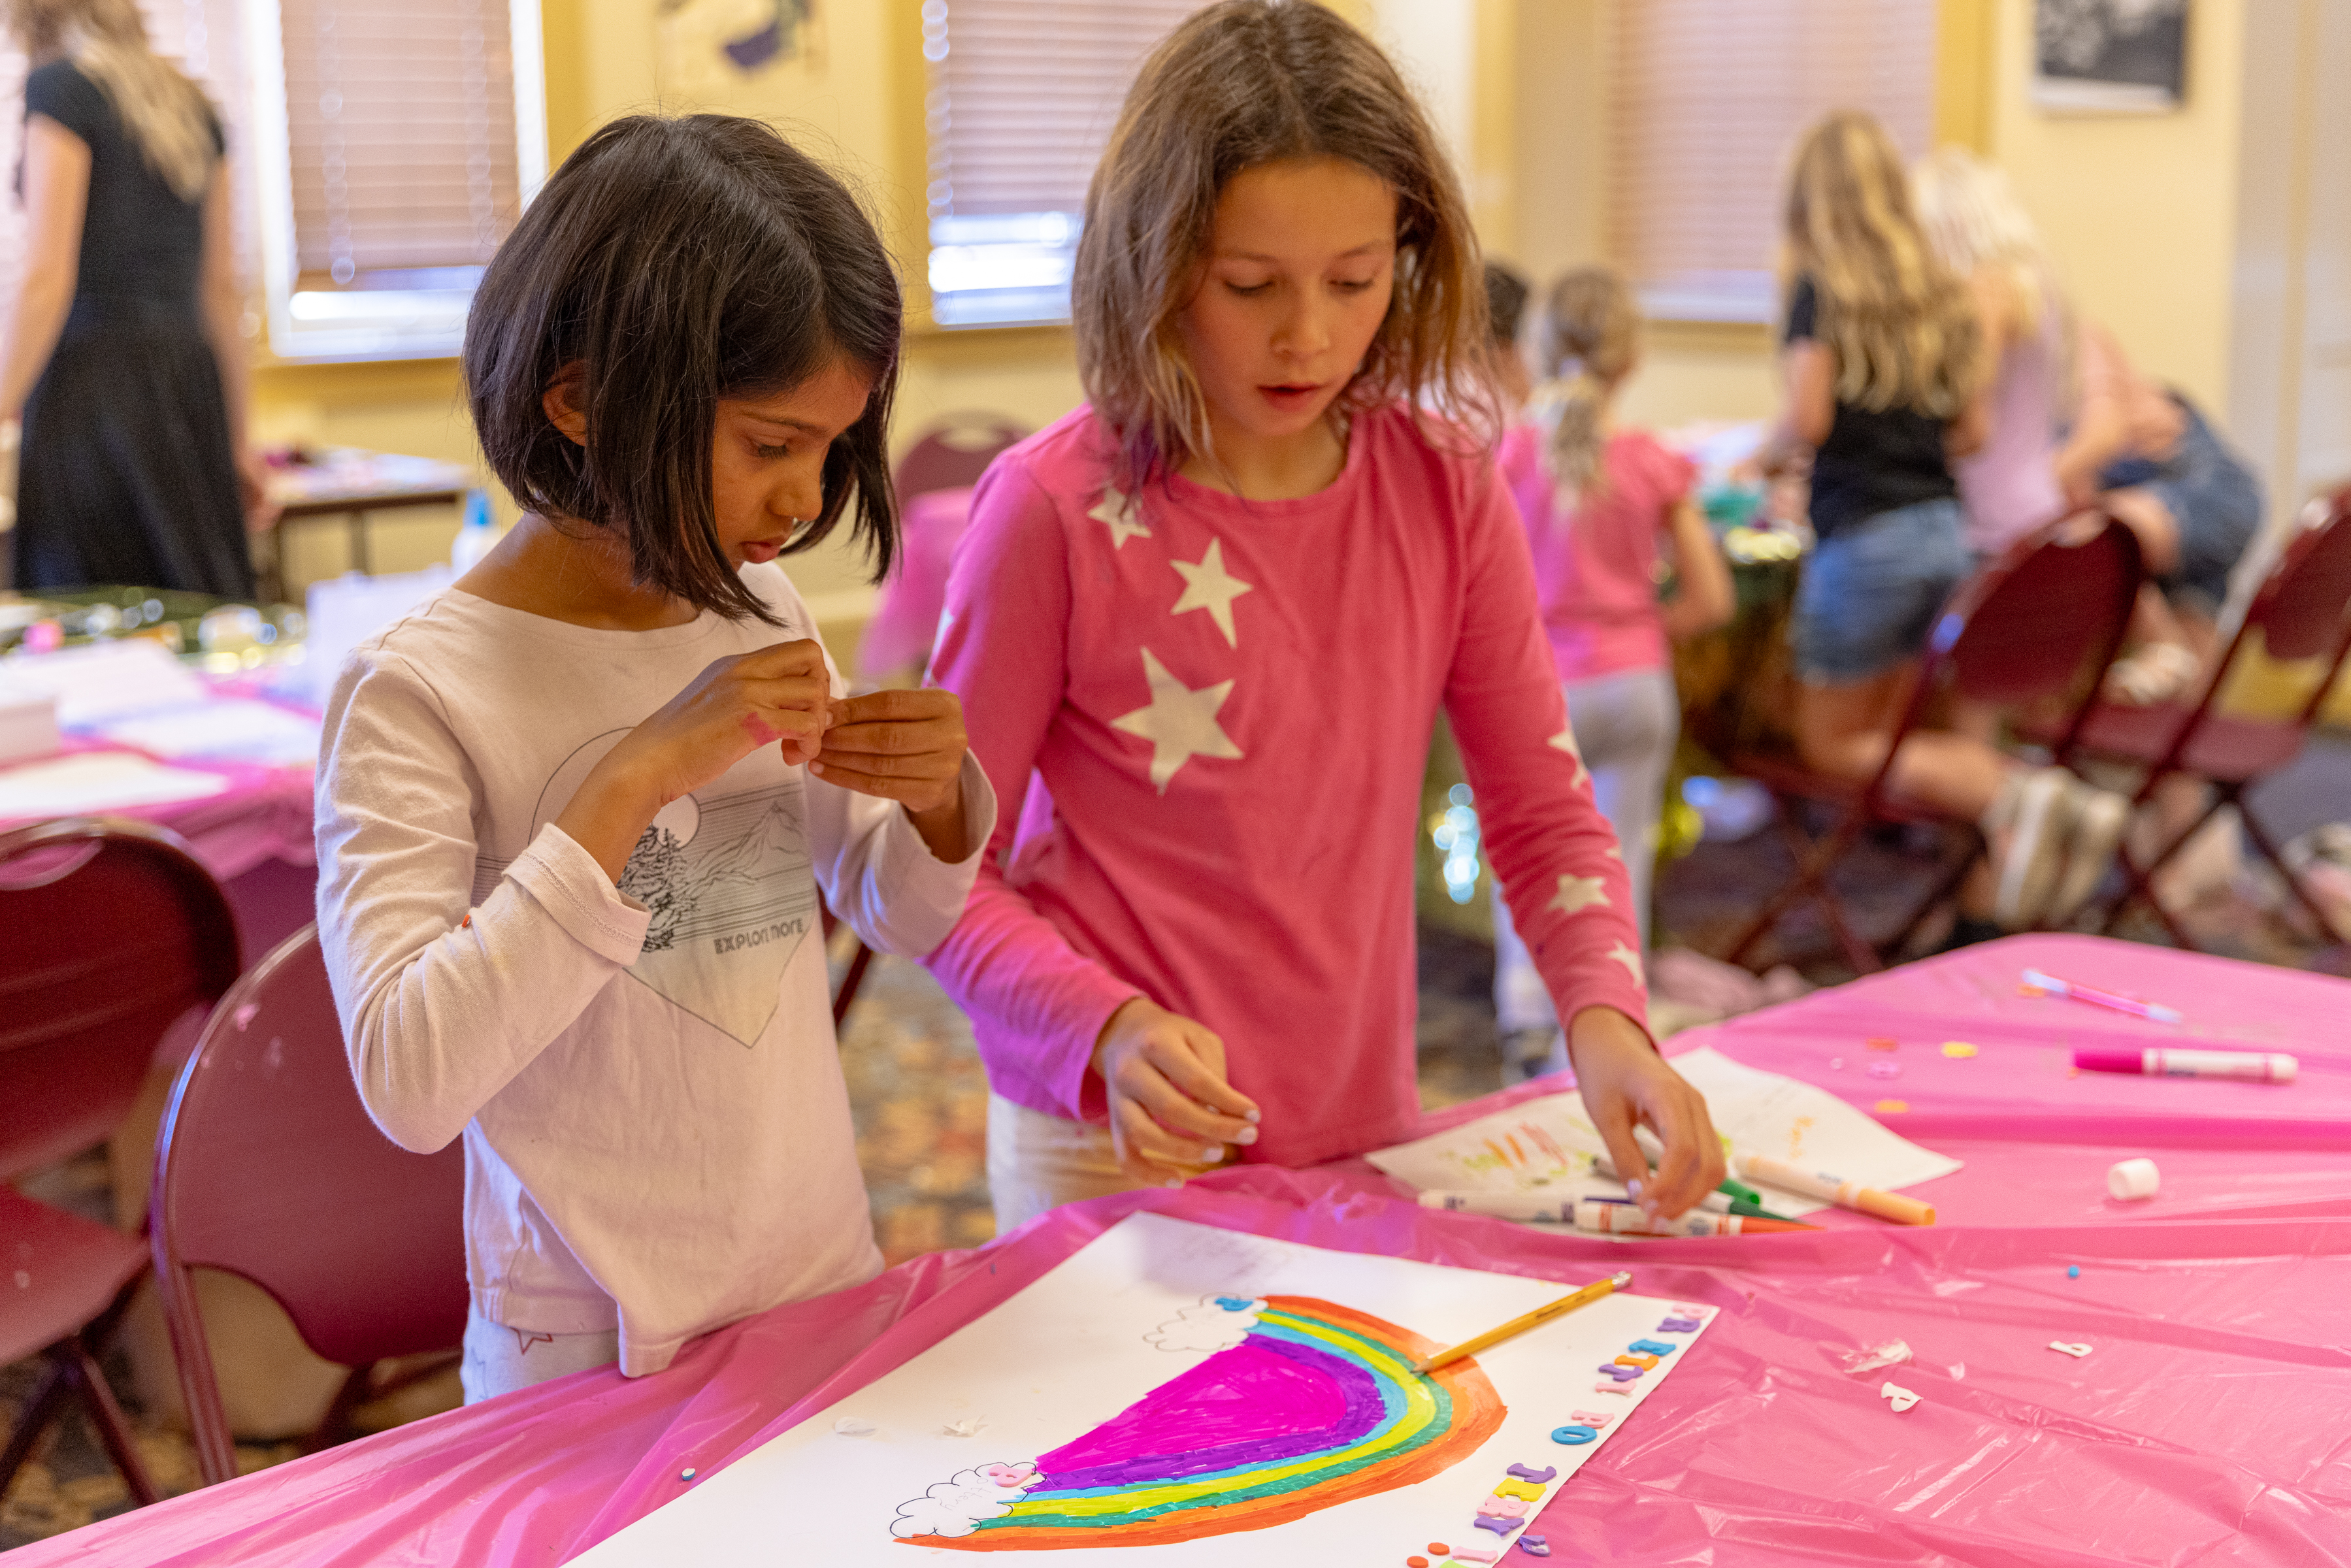 Two campers smile as they work on their rainbow artwork